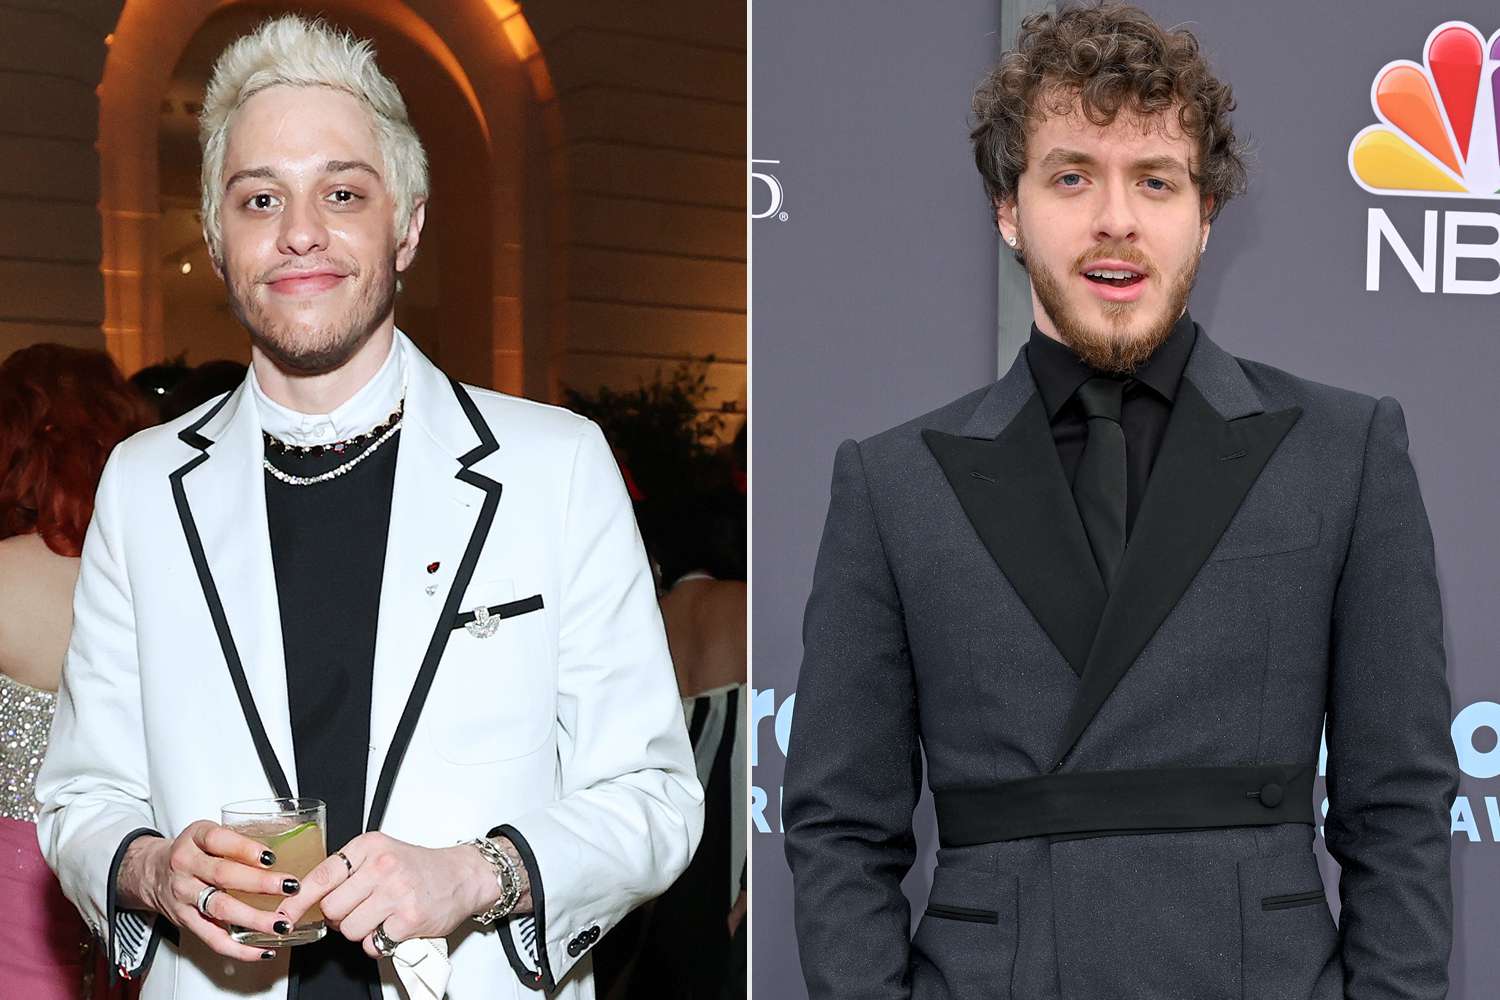 NEW YORK, NEW YORK - SEPTEMBER 13: (EXCLUSIVE COVERAGE) Pete Davidson attends the The 2021 Met Gala Celebrating In America: A Lexicon Of Fashion at Metropolitan Museum of Art on September 13, 2021 in New York City. (Photo by Cindy Ord/MG21/Getty Images for The Met Museum/Vogue ); LAS VEGAS, NEVADA - MAY 15: Jack Harlow attends the 2022 Billboard Music Awards at MGM Grand Garden Arena on May 15, 2022 in Las Vegas, Nevada. (Photo by Axelle/Bauer-Griffin/FilmMagic)